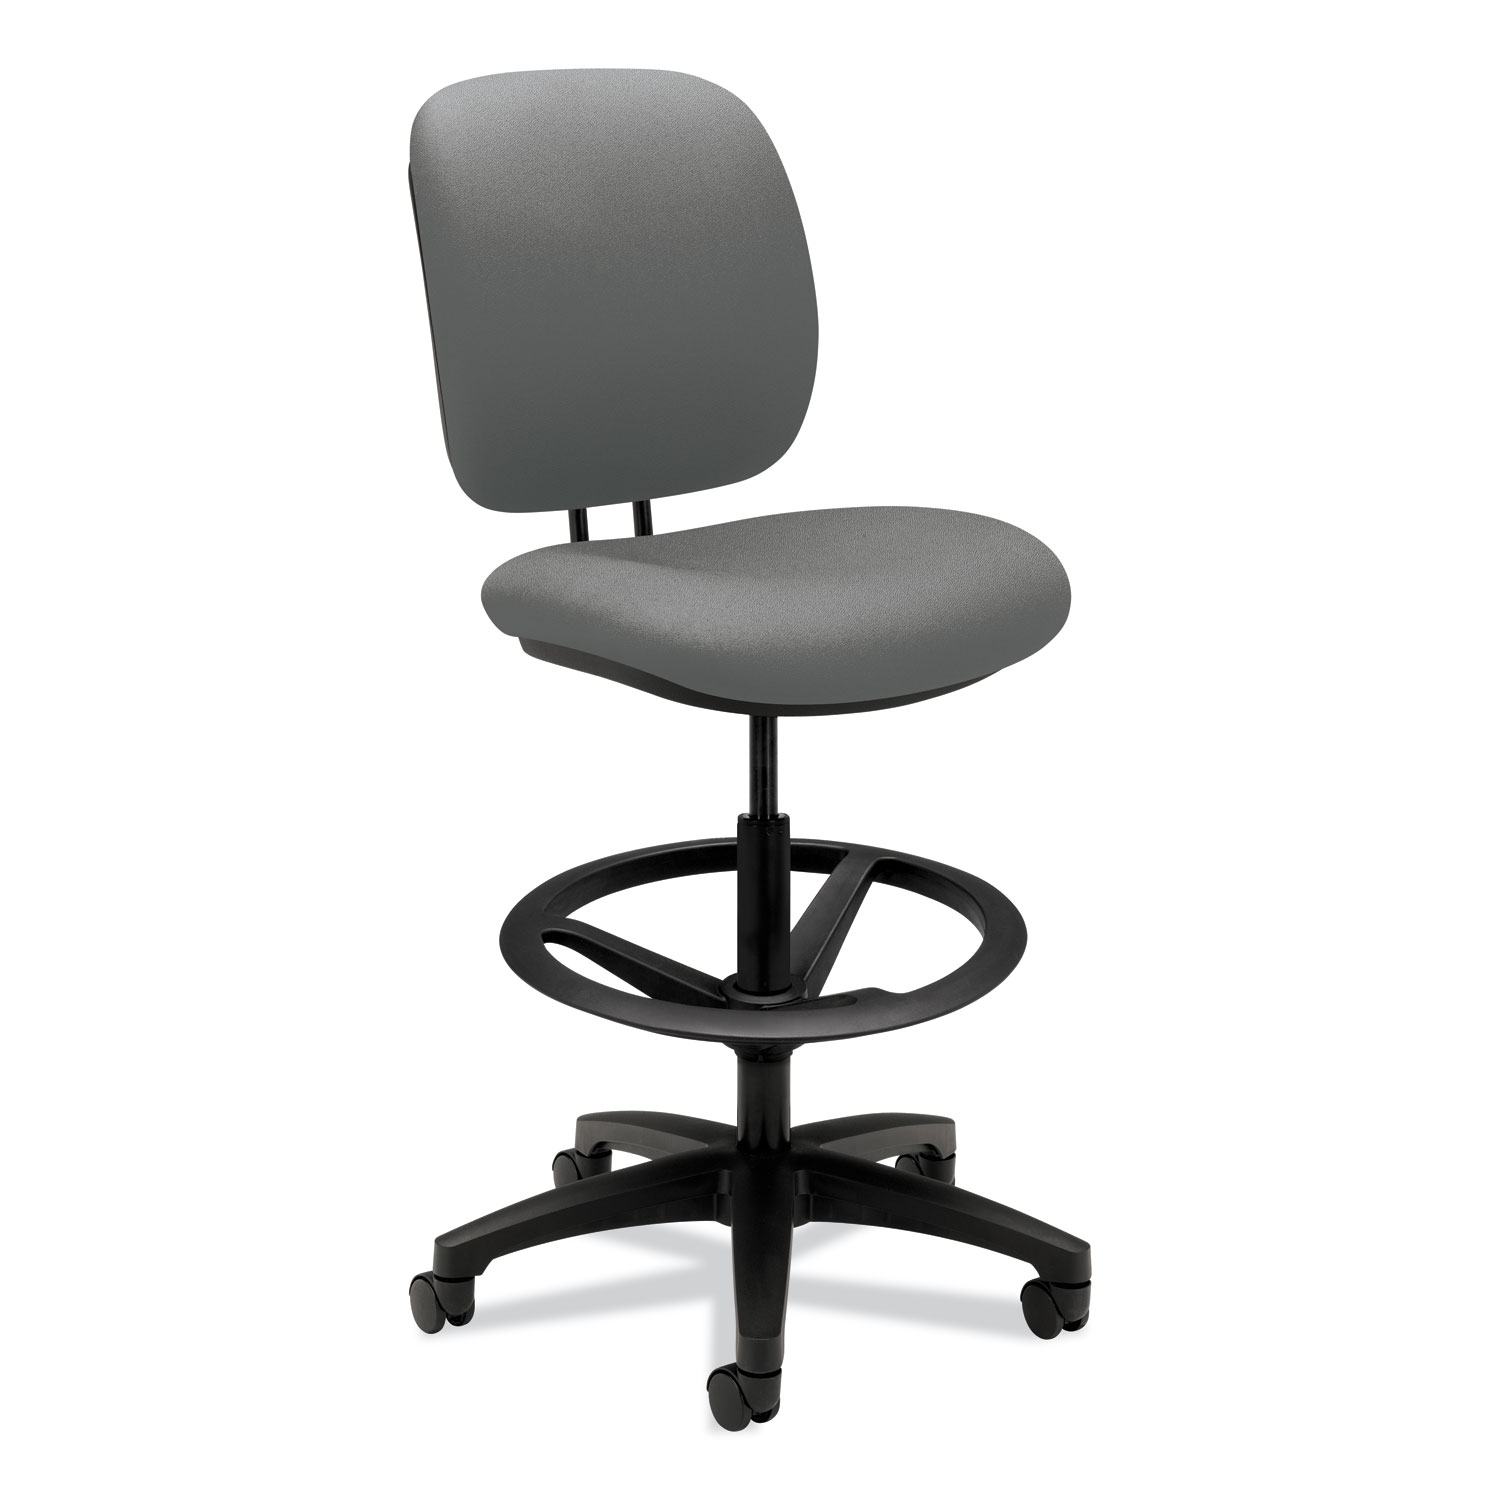  HON HON5905CU22T ComforTask Task Stool with Adjustable Footring, 32 Seat Height, Supports up to 300 lbs, Frost Seat/Back, Black Base (HON5905CU22T) 